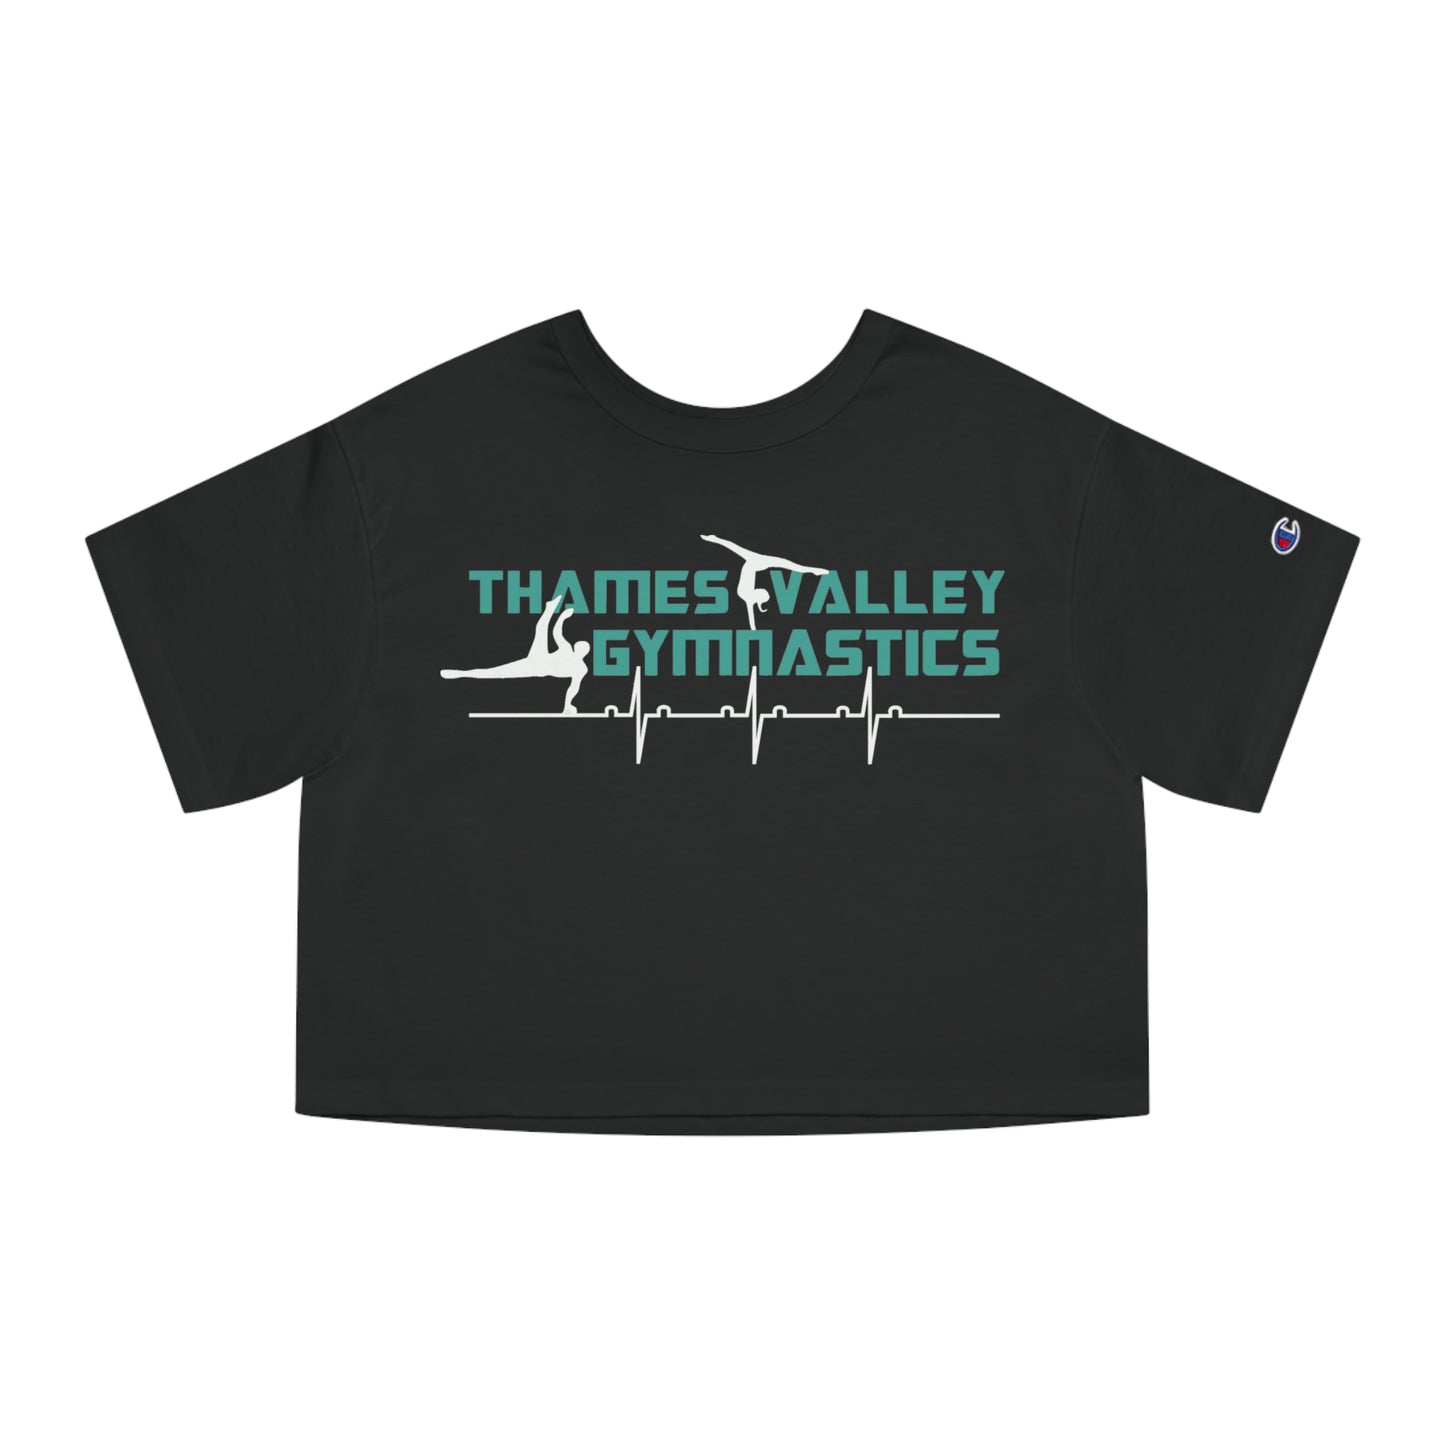 Thames Valley Champion Women's Heritage Cropped T-Shirt